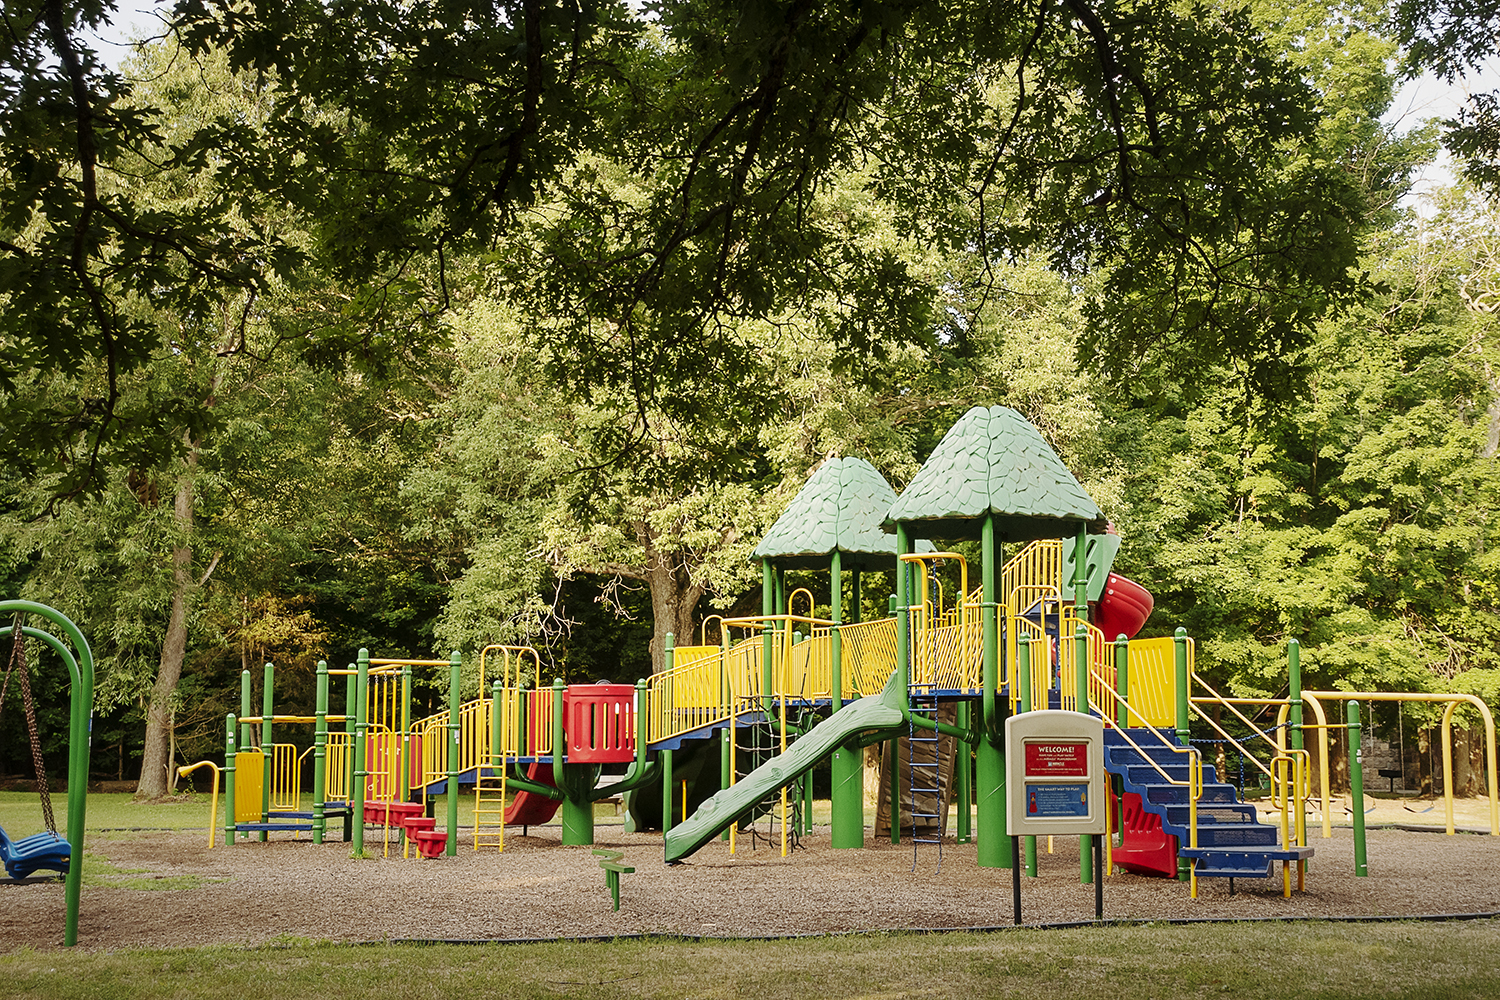 Flushing, MI - Monday, July 16, 2018: A large playscape at the Flushing County Park.